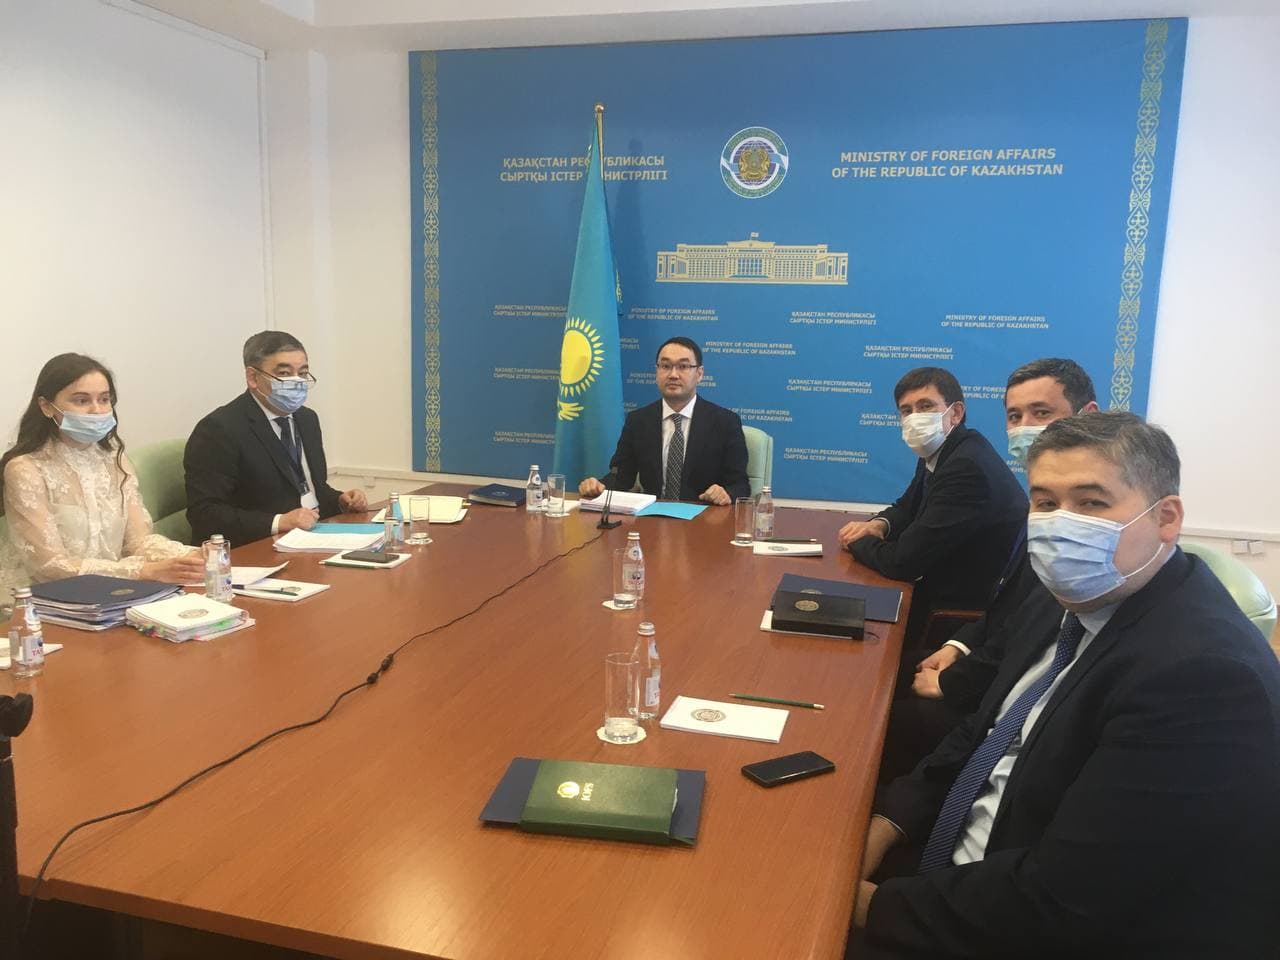 On the 57th meeting between the Commission on Cooperation of Kazakhstan and International Organizations   